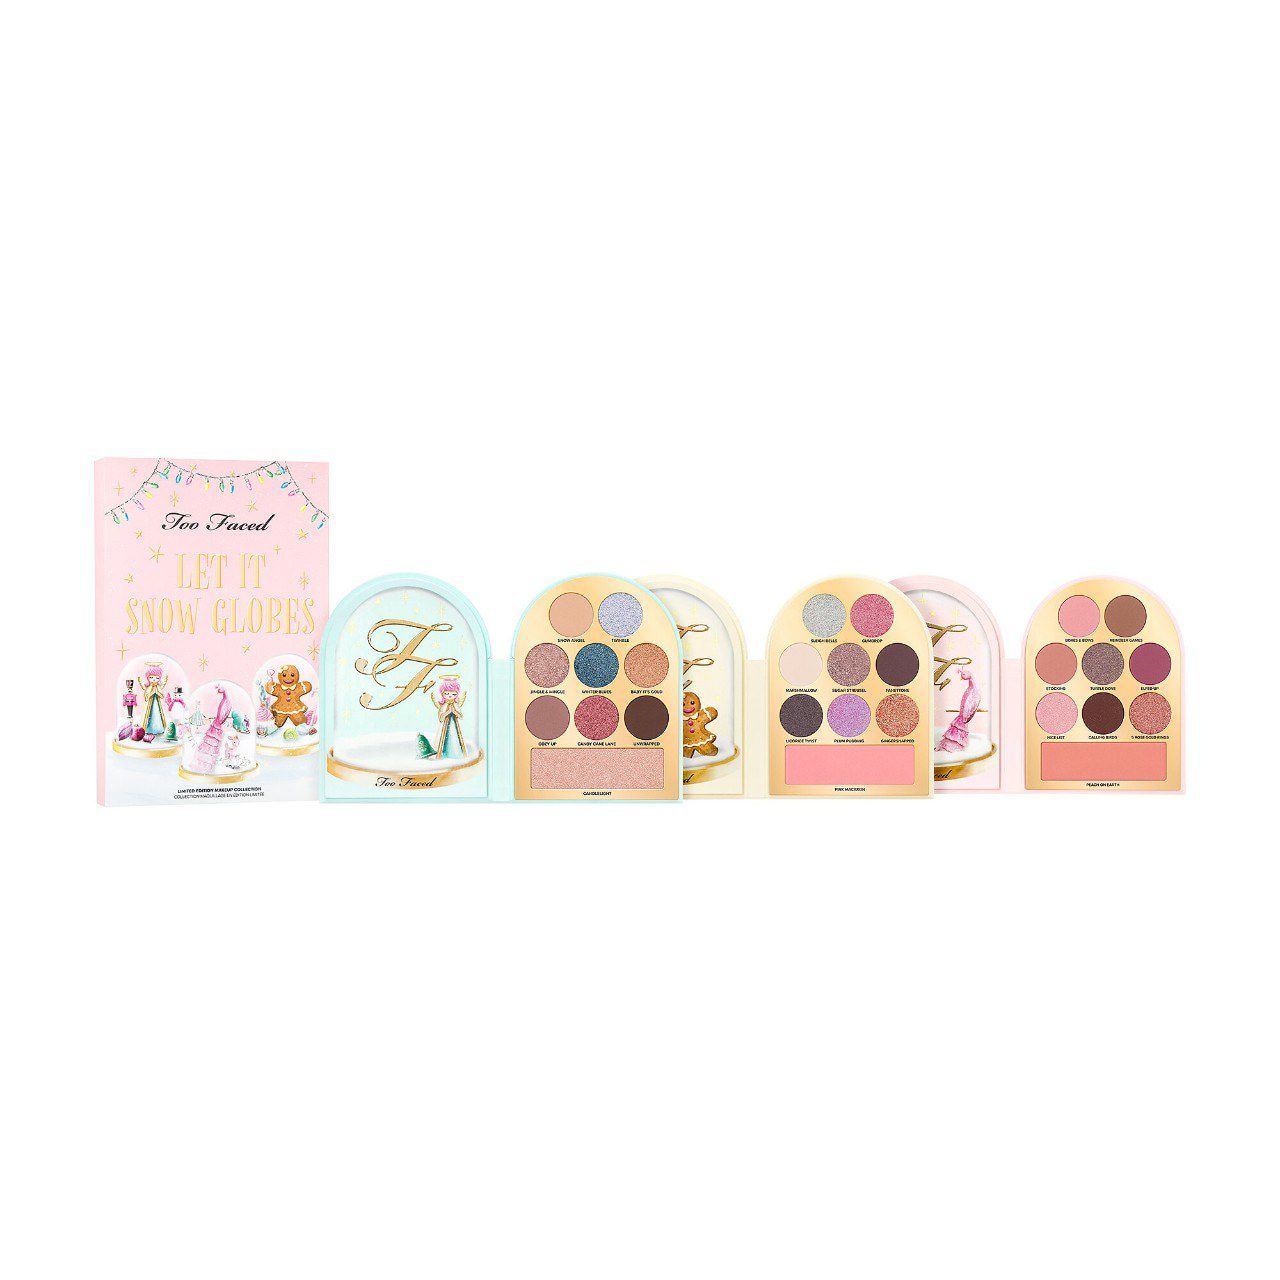 Too Faced Let It Snow Globes Makeup Collection - 0